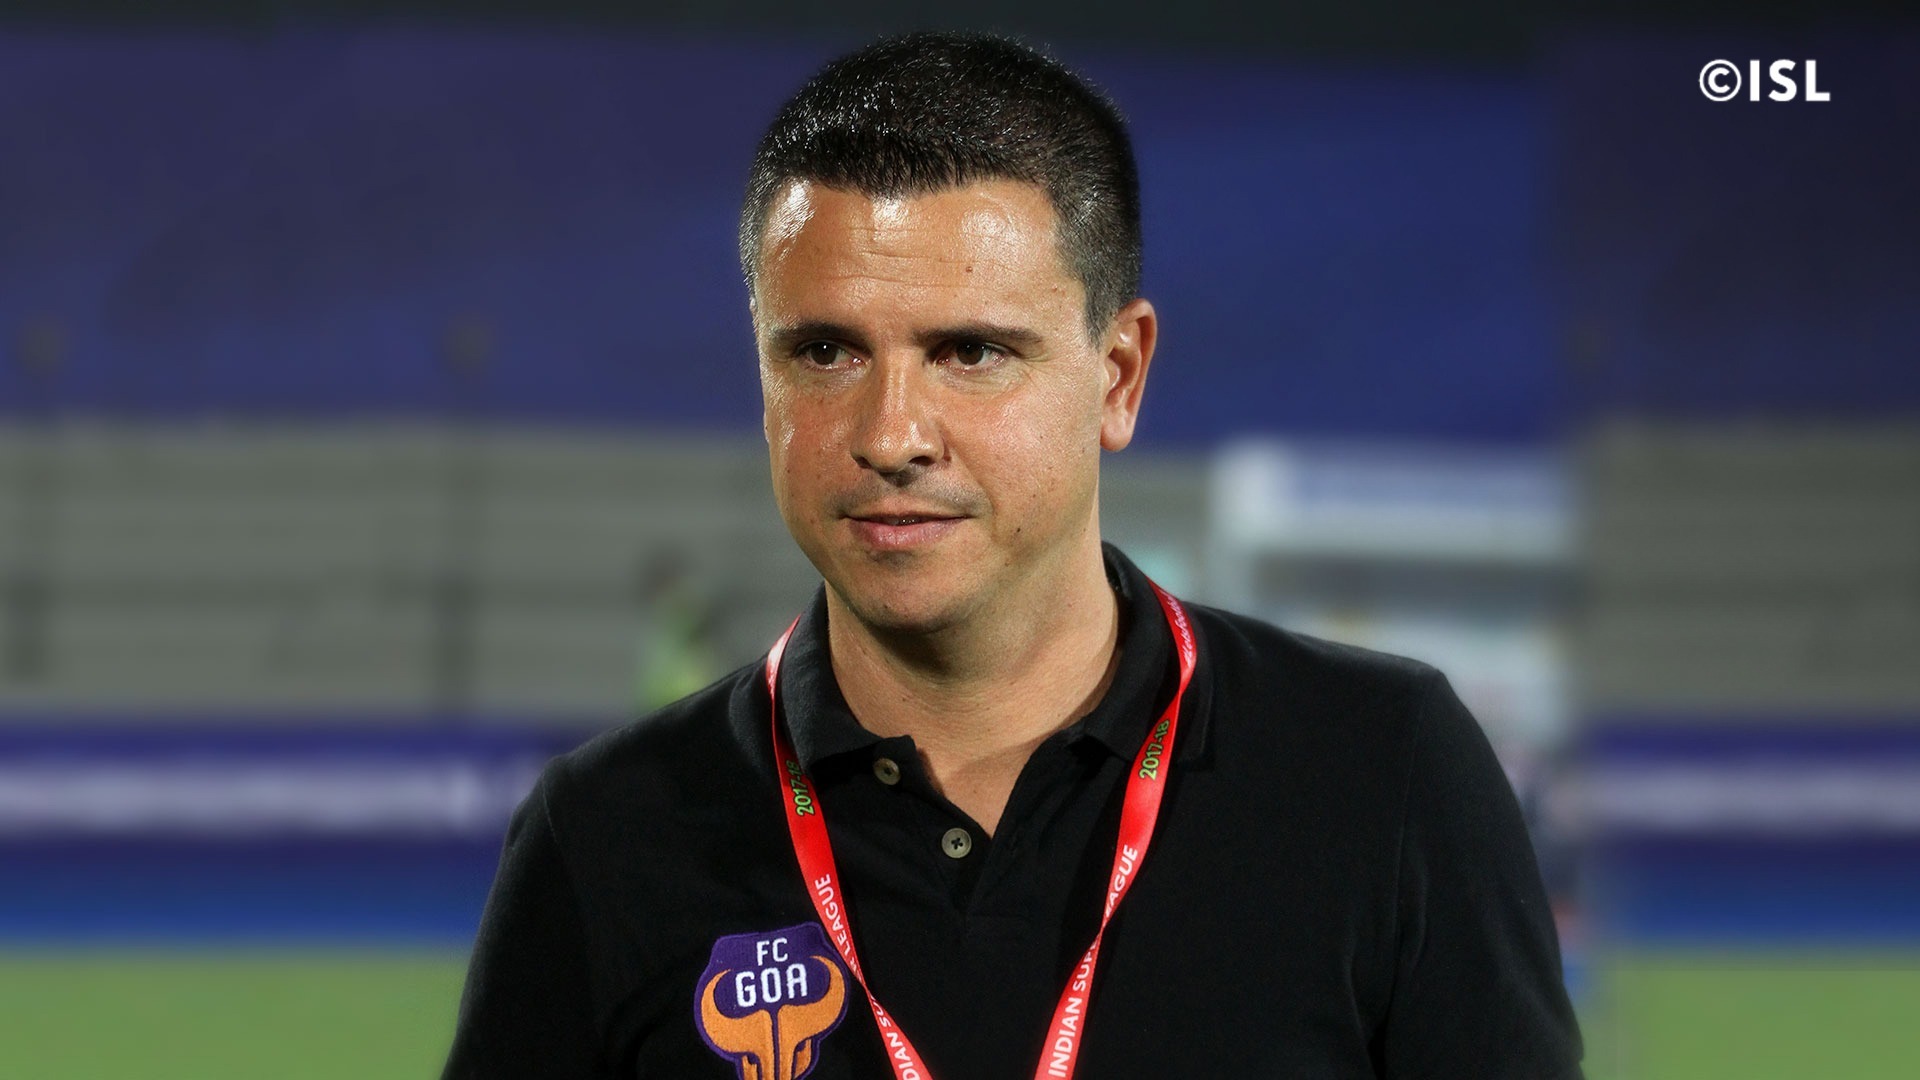 ISL 2019-20 | It was difficult match against tough opposition, says Sergio Lobera